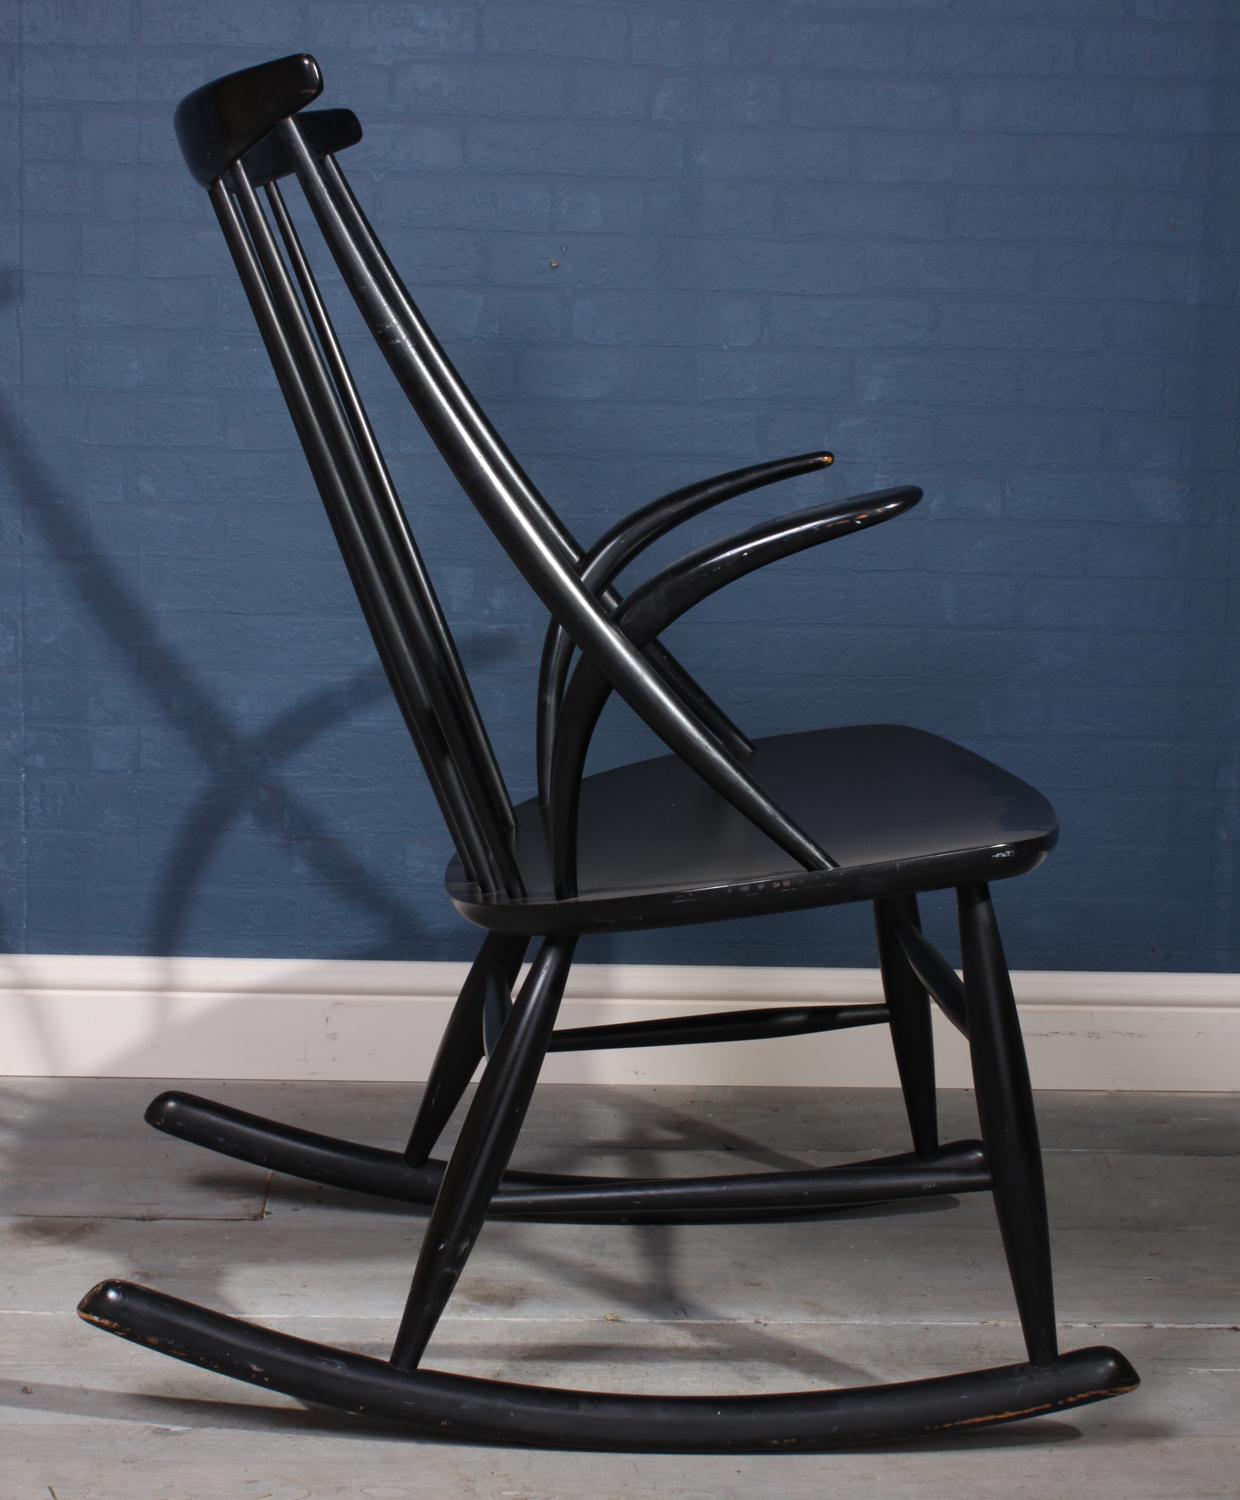 Midcentury rocking chair by Illum Wikkelsø
An ebonized black rocking chair by Illum Wikkelsø designed and produced in the 1960s in Denmark

Age: 1960

Style: Mid-Century Modern.

Material: Beech

Origin: Denmark

Condition: Very Good,